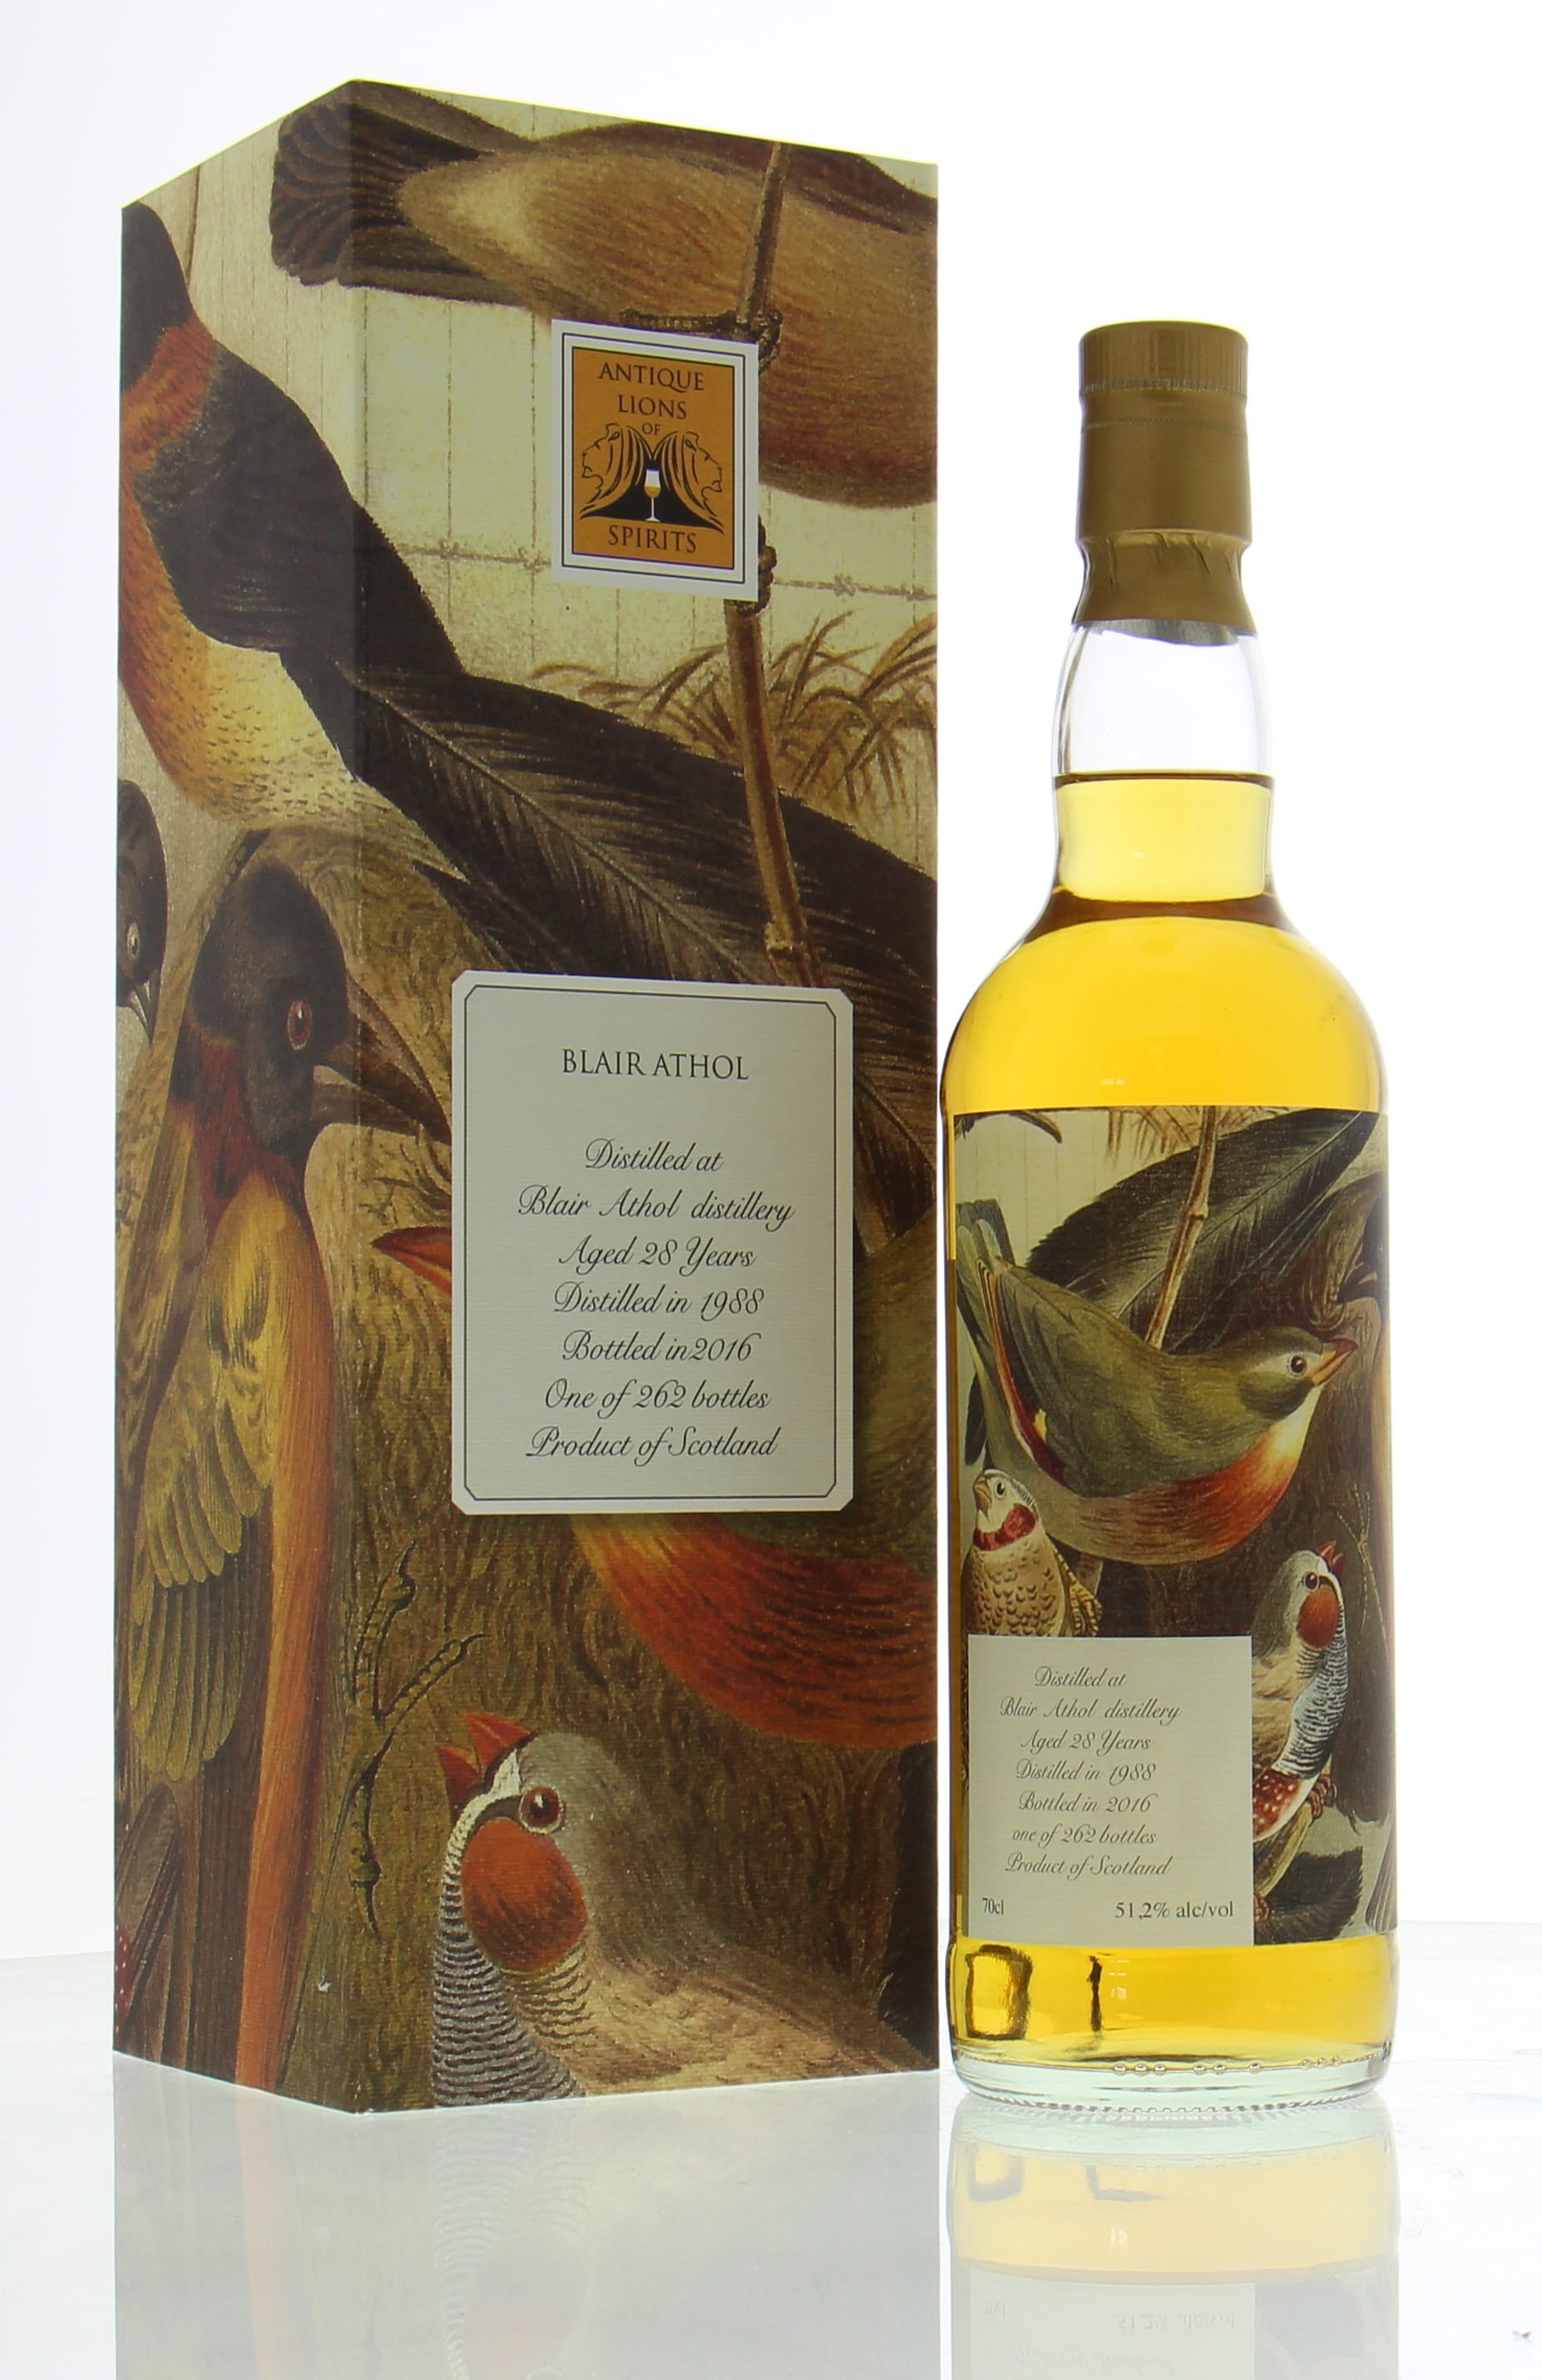 Blair Athol - 28 years Old Antique Lions of Spirits The Birds 51.2% 1988 In Original Container